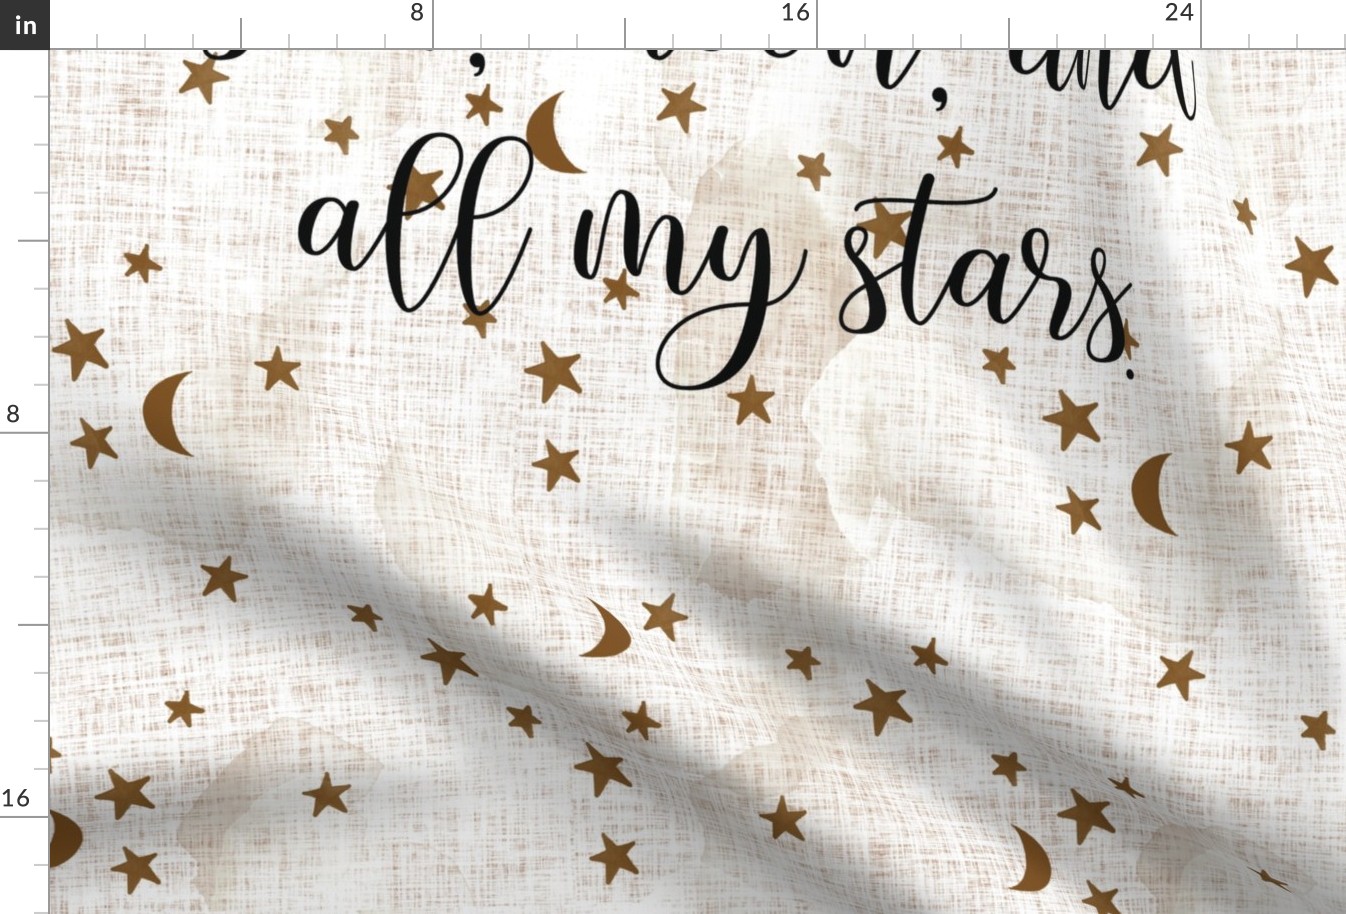 27x36: sugar sand linen you are the sun, moon, and all my stars